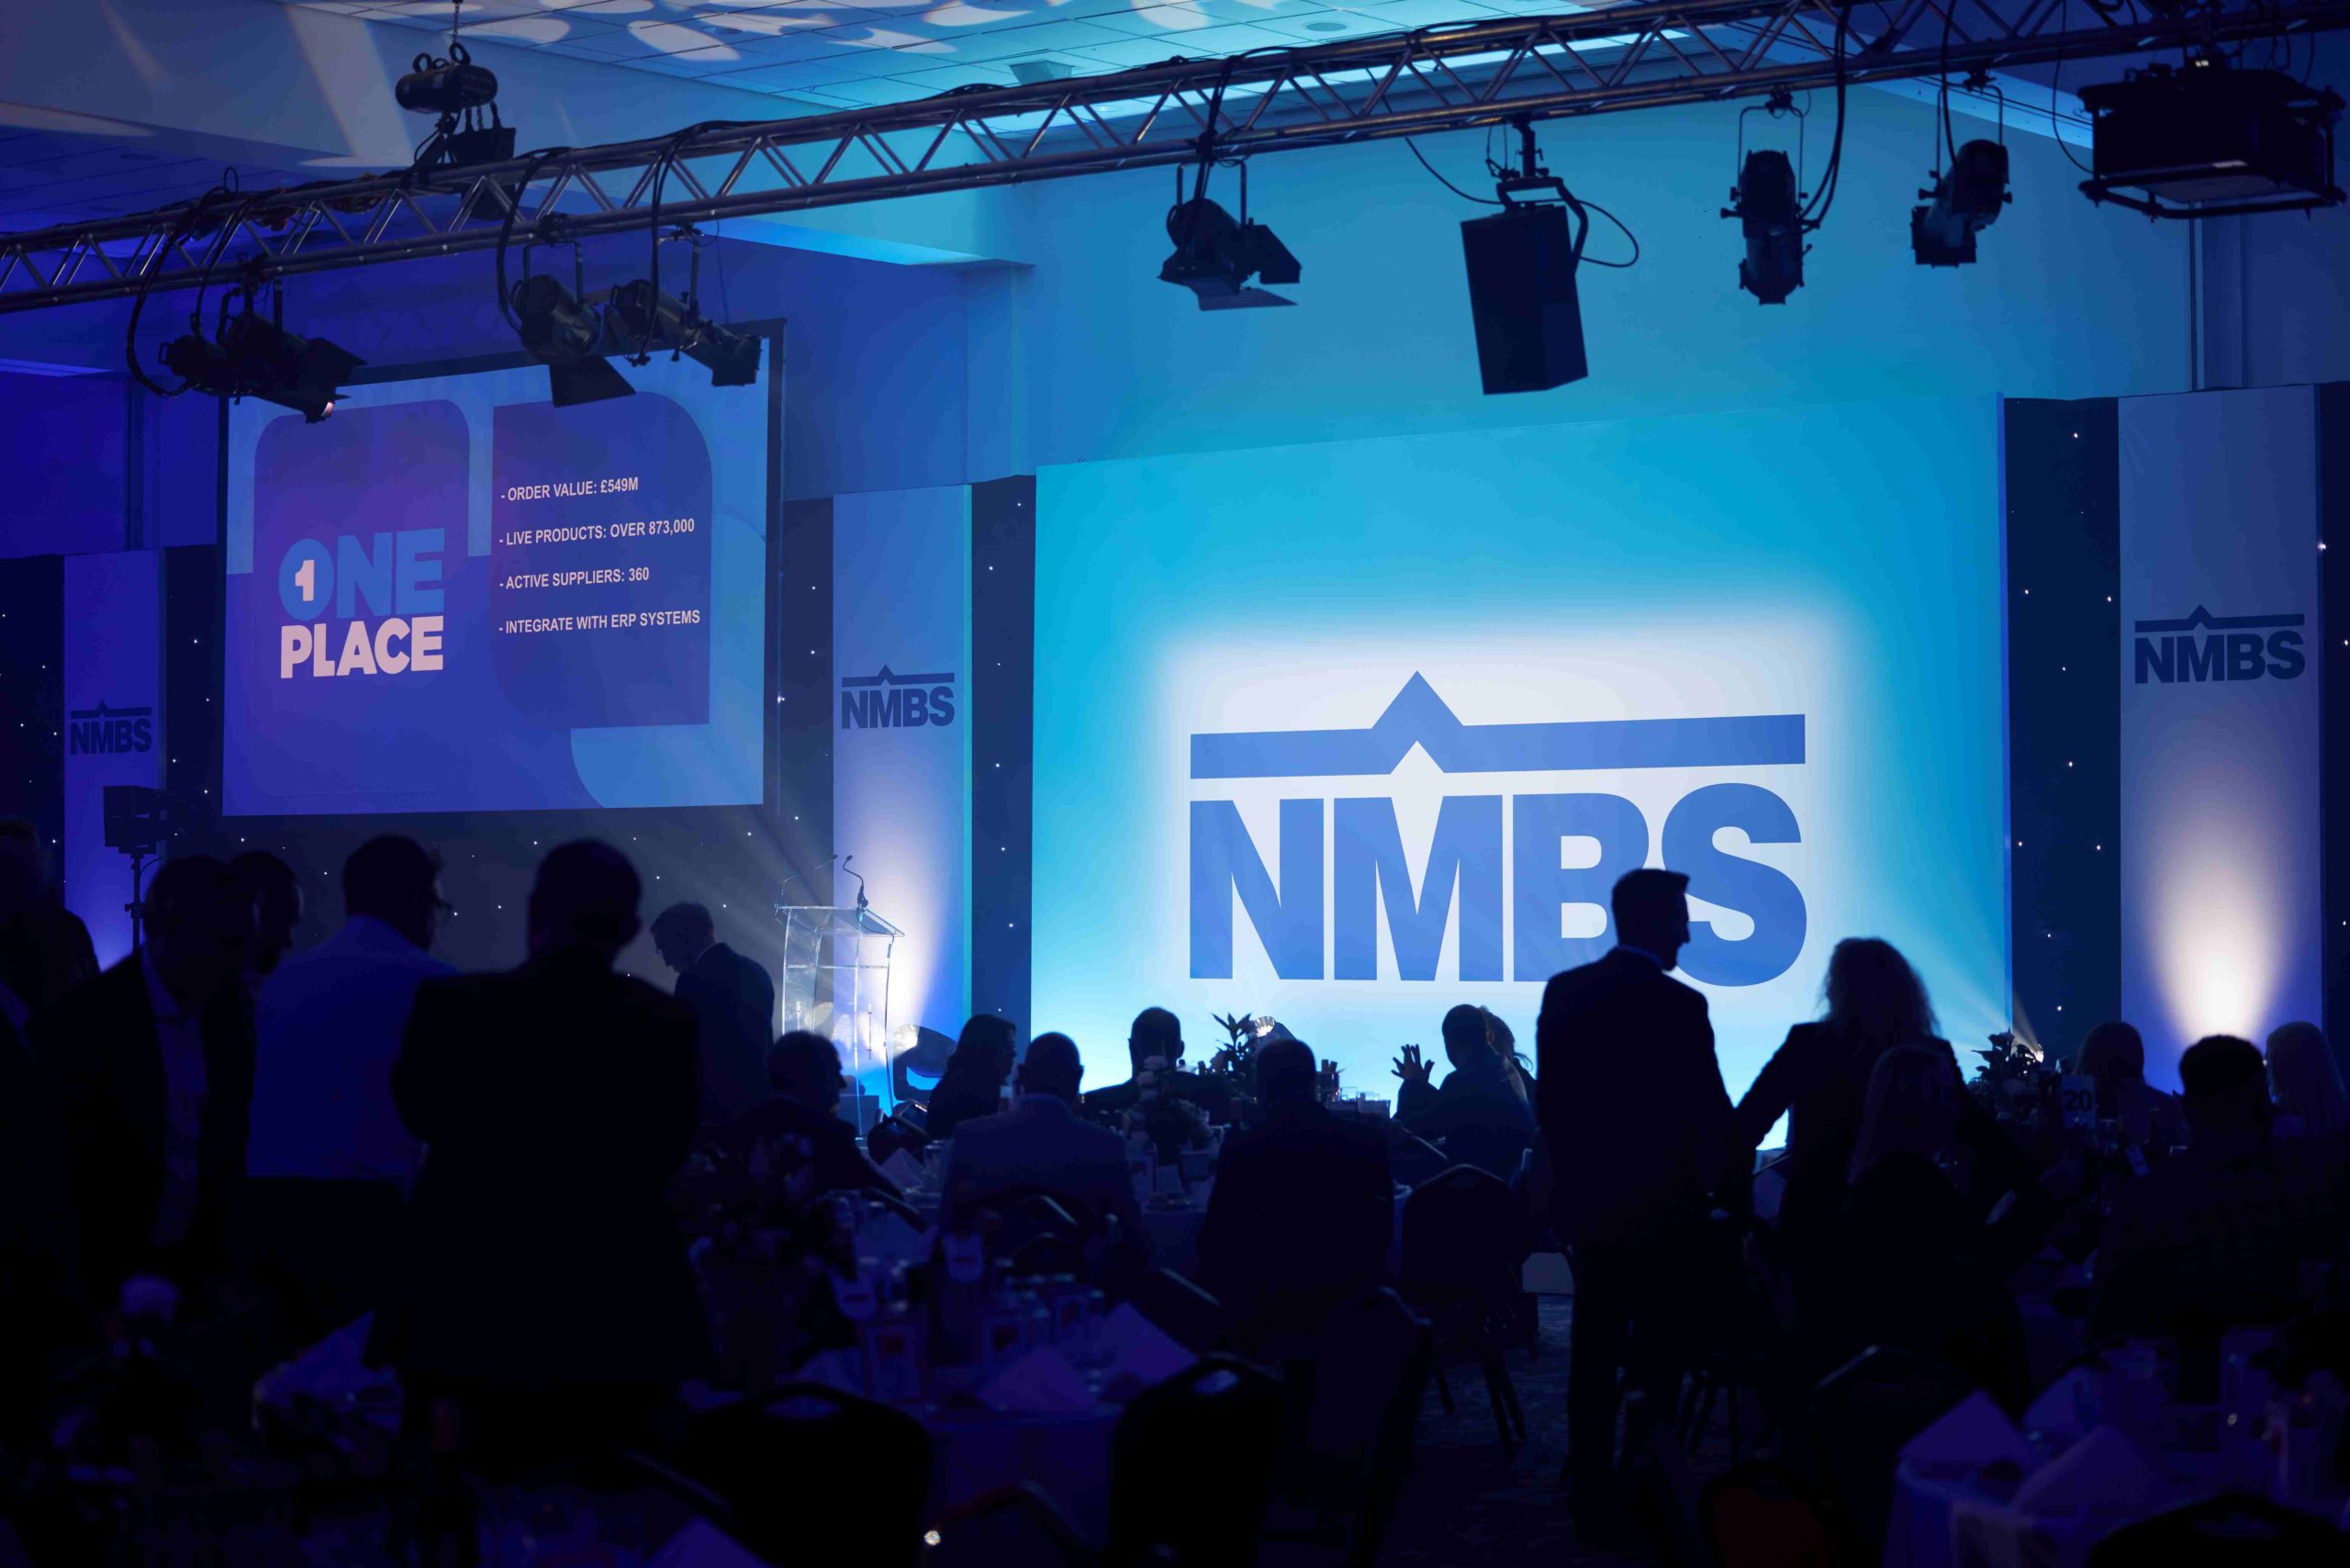 Over 15,000 interactions were made between the 280 exhibitors and 1,080 visitors at this year’s NMBS Exhibition, which the organisers say is the highest number in the show’s history.